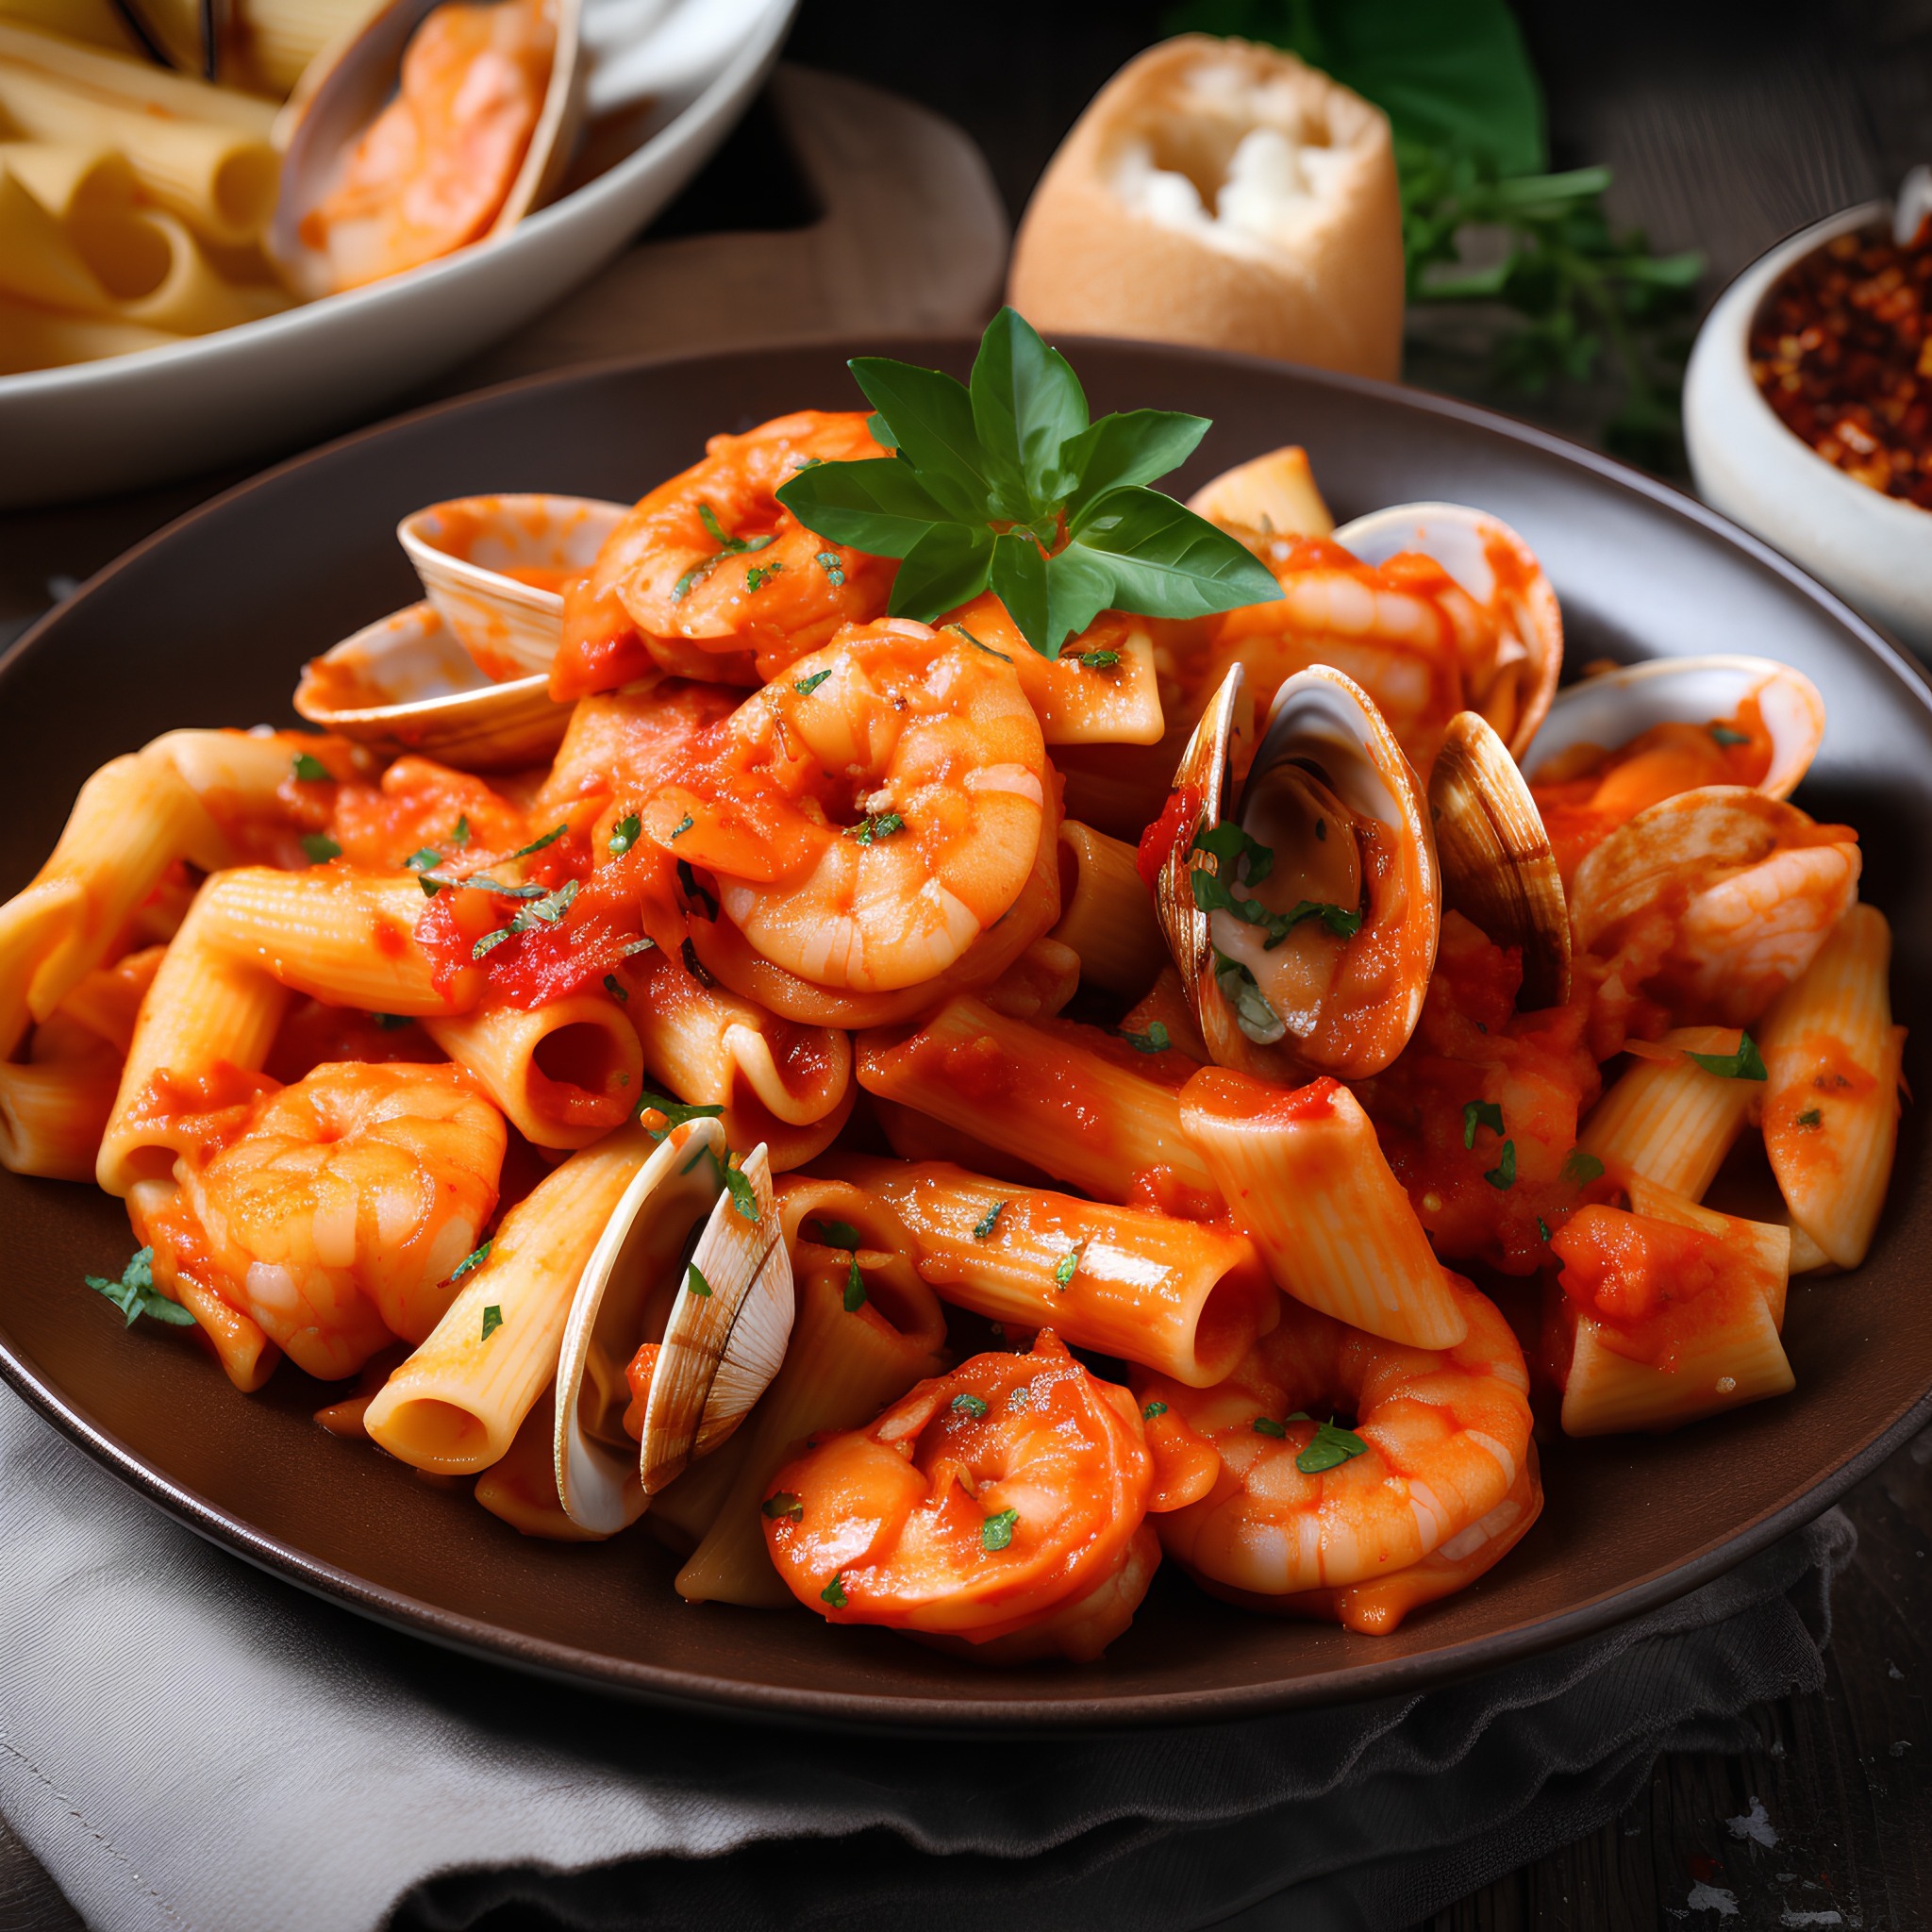 Penne with Shrimp, Clams, and Tomato Sauce